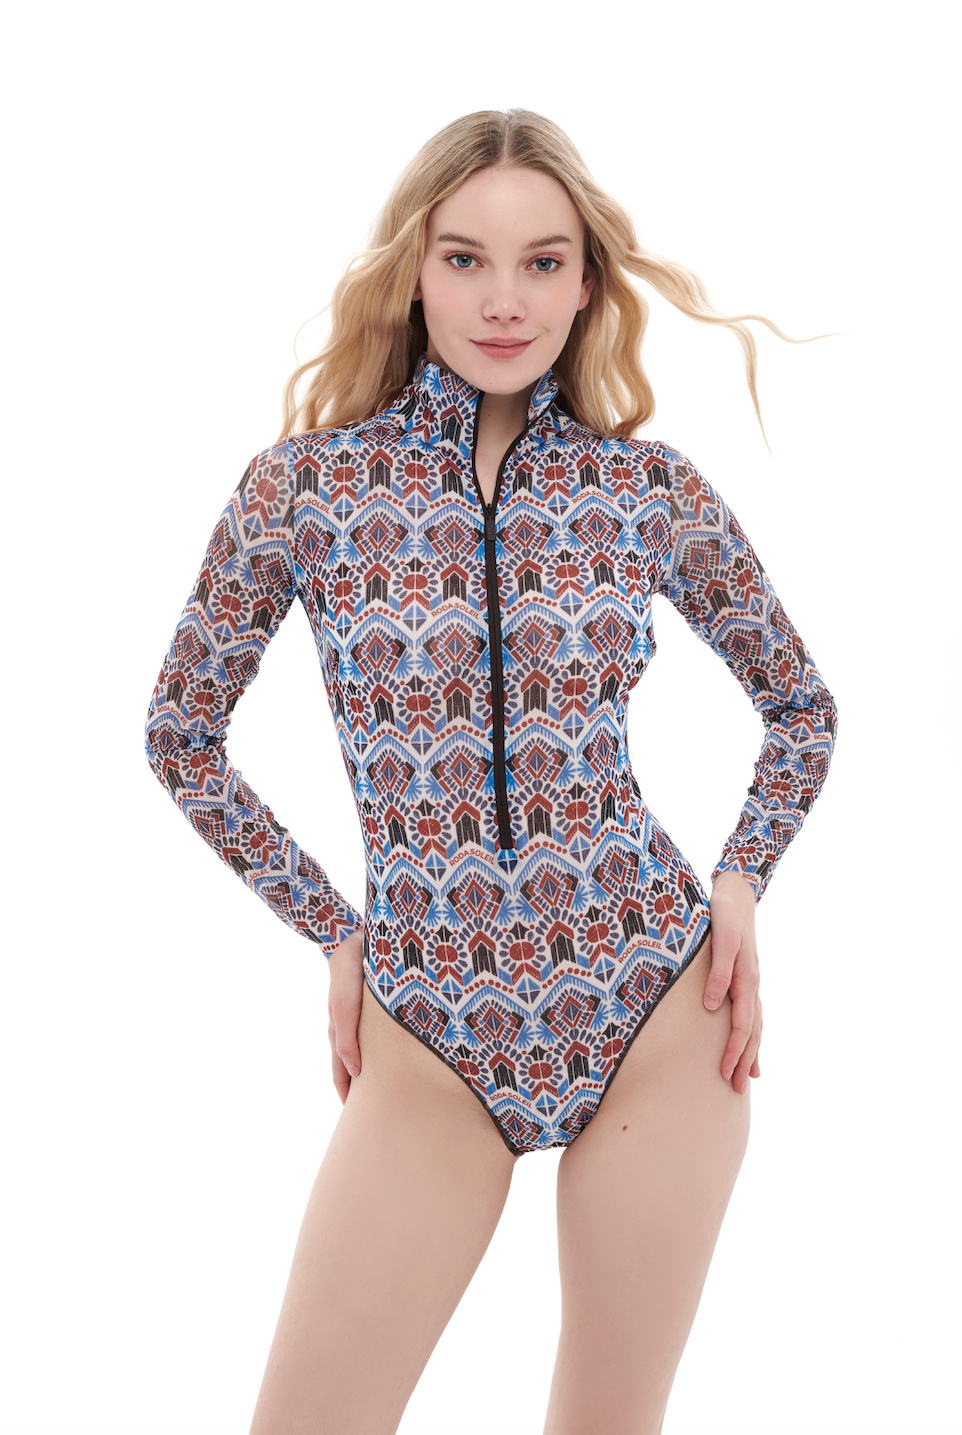  This file contains information about Marrakesh print swimsuits, featuring sleeves, a zipper, and SPF35 protection. It showcases sustainable fashion for beachgoers seeking classic luxury.